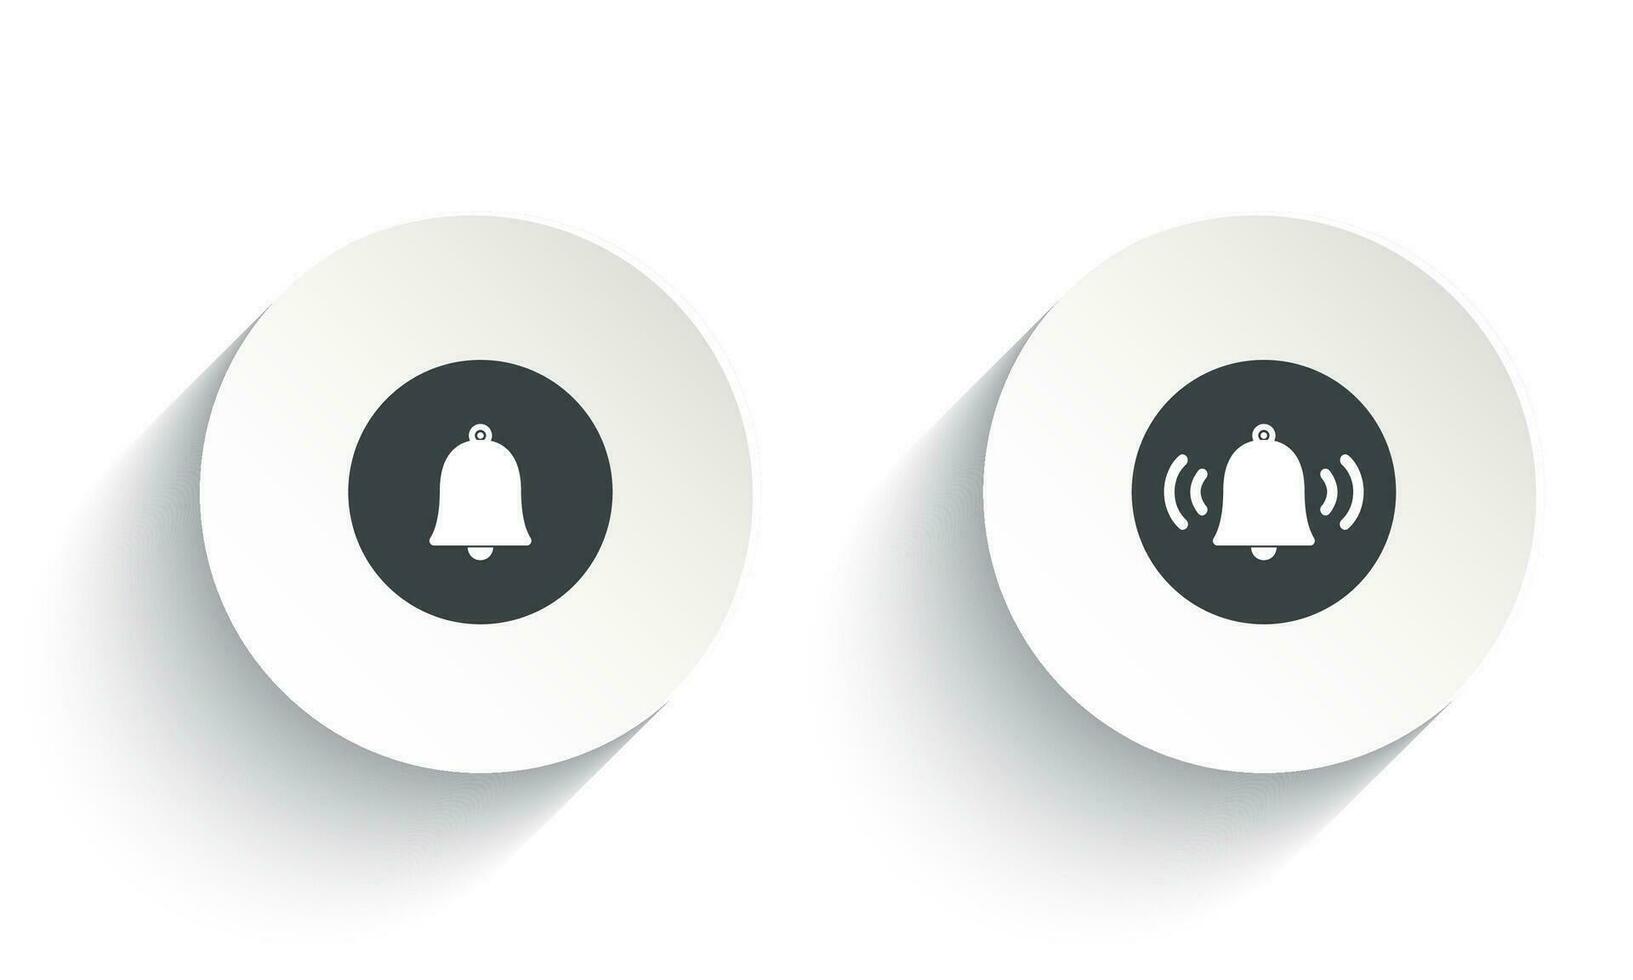 Notification icon for your web site design. Vector bell icon set with shadow on a round white button.